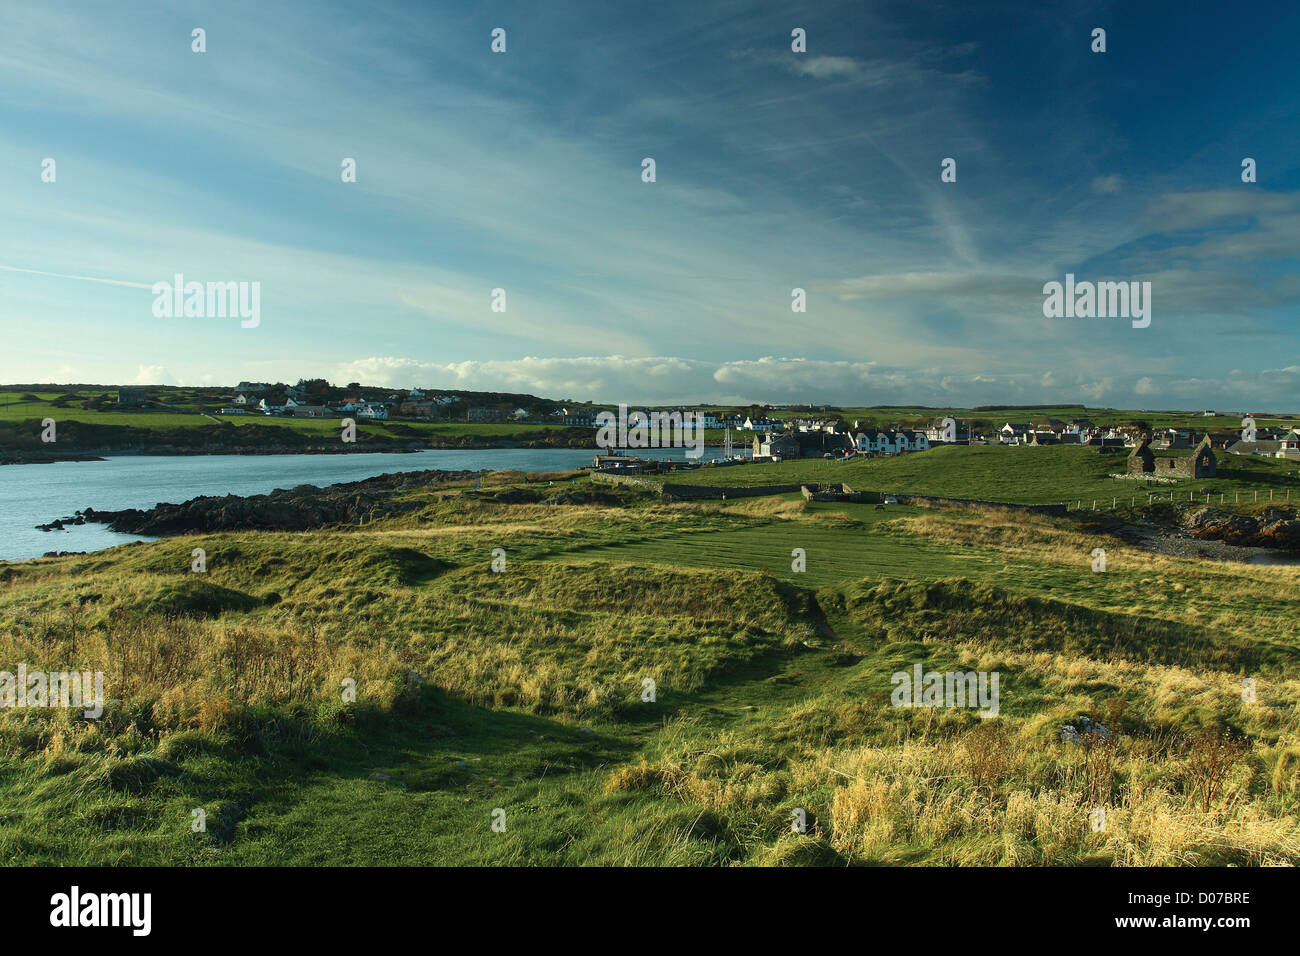 Isola di Whithorn e san Ninian's cappella al crepuscolo, Dumfries and Galloway Foto Stock